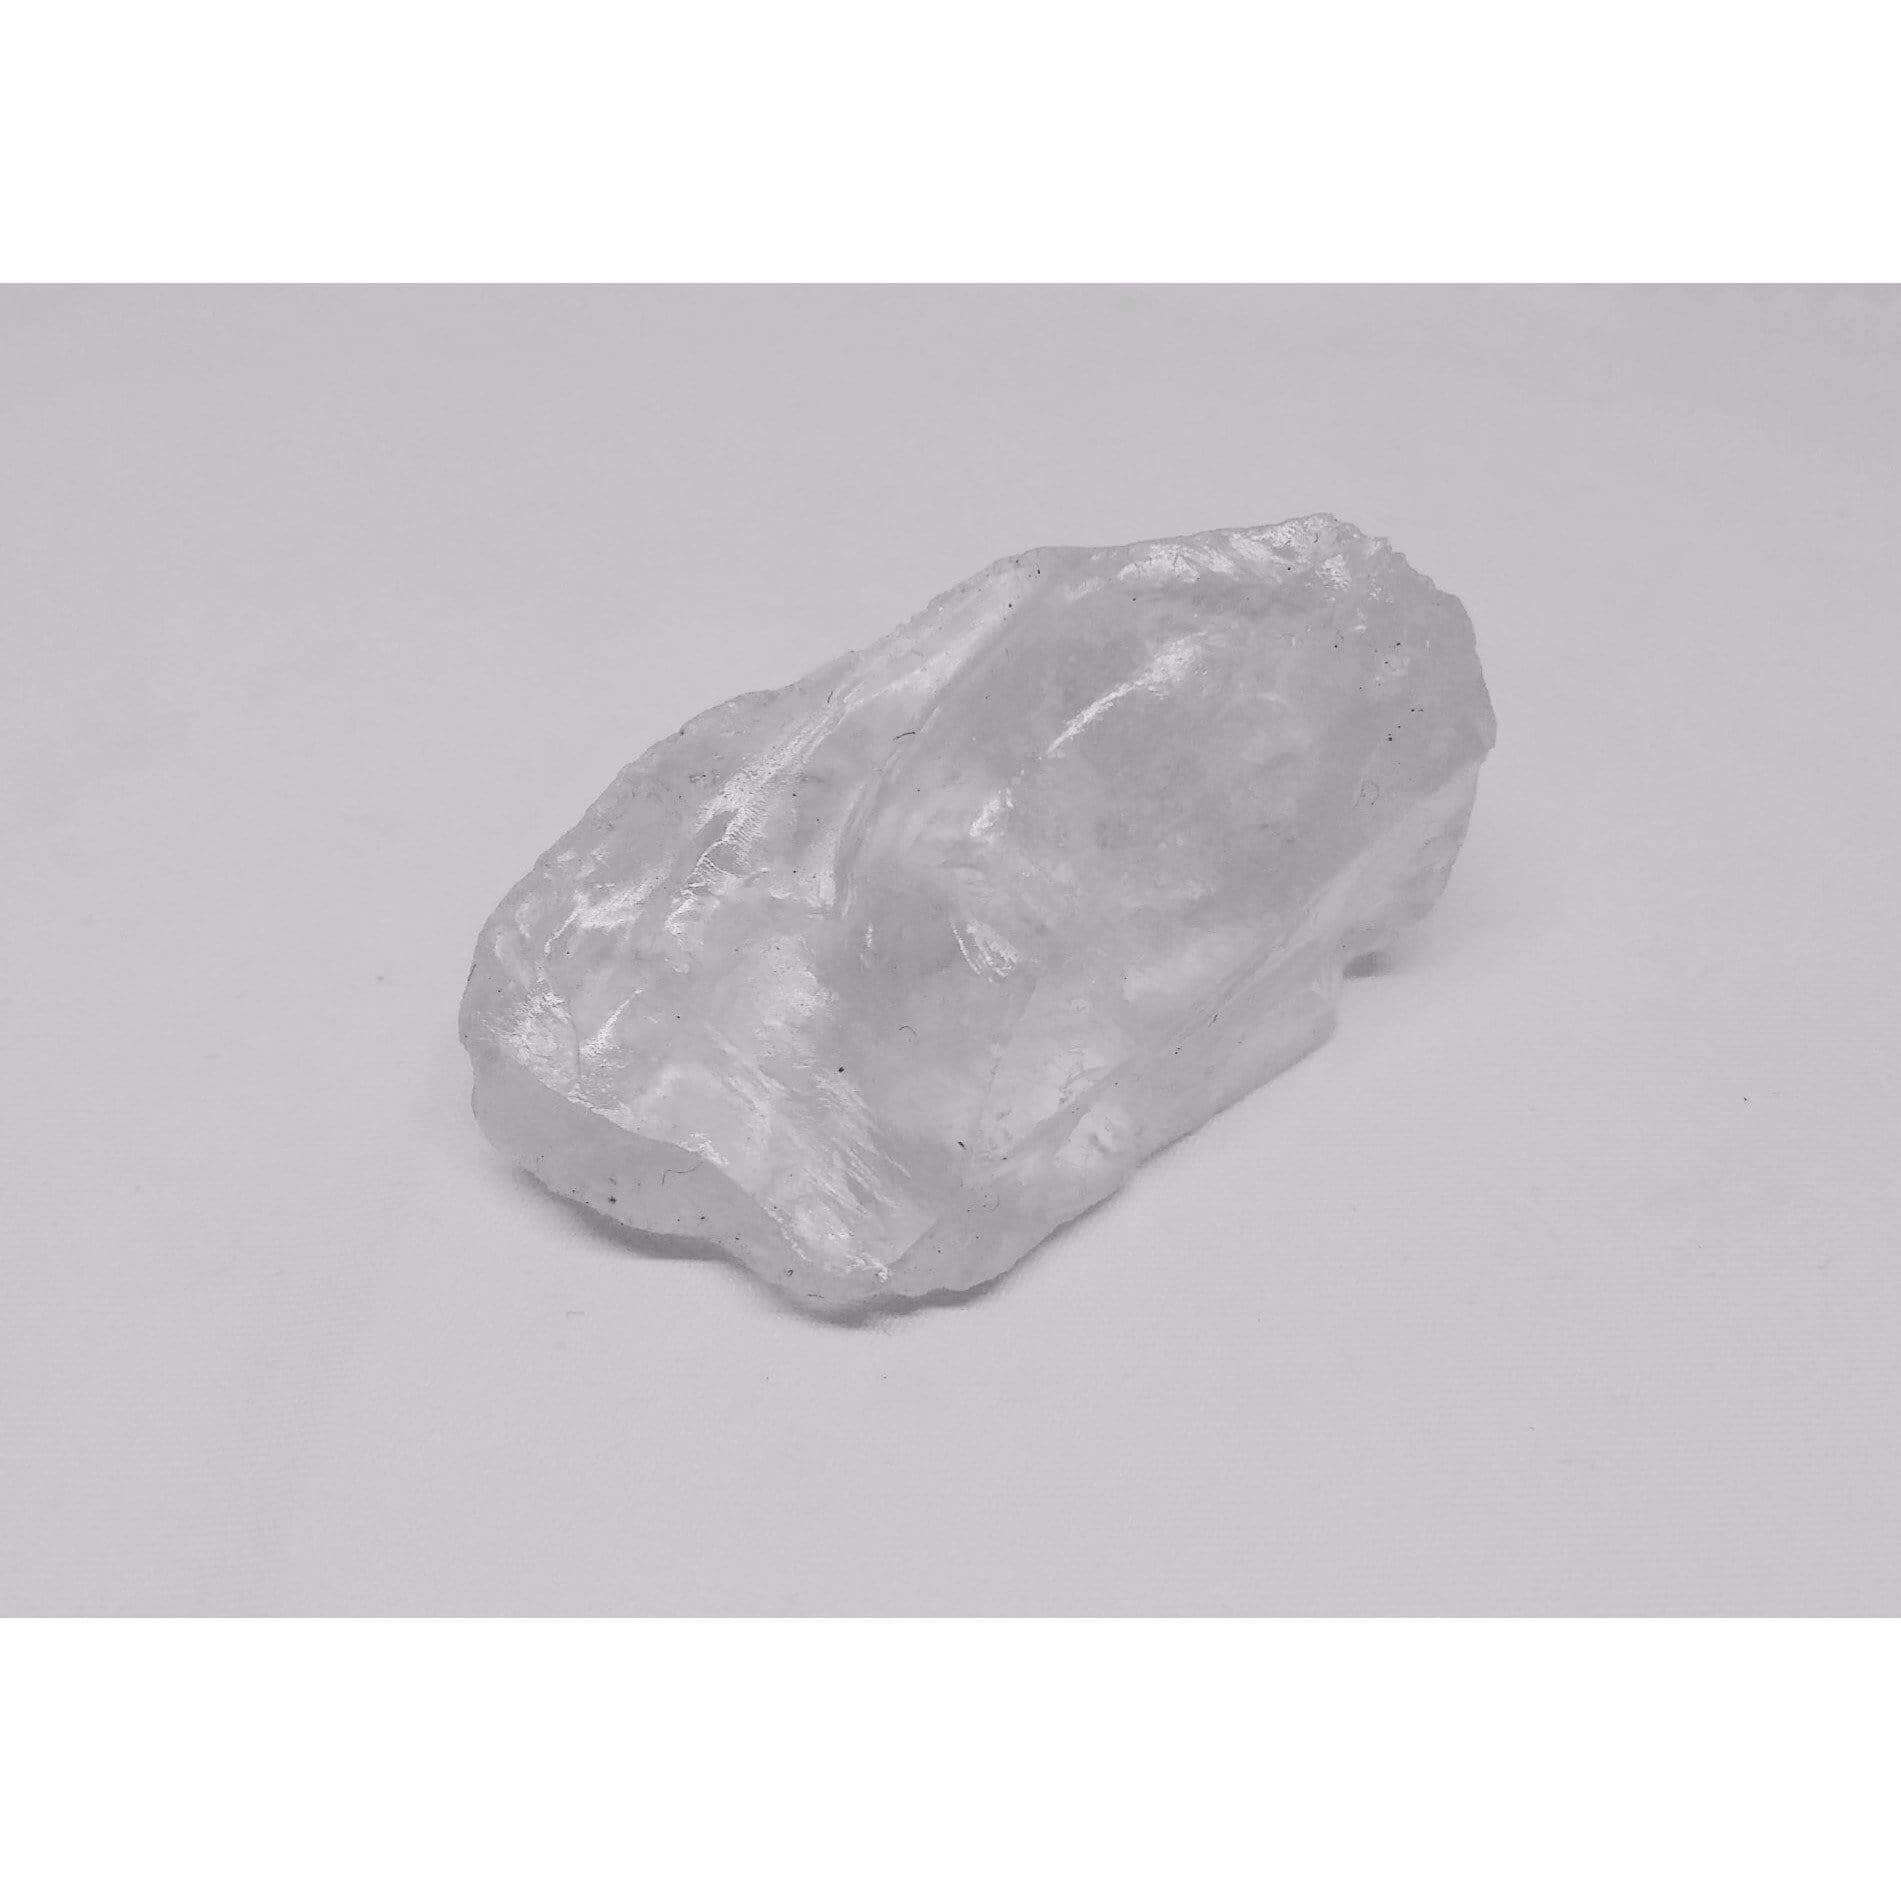 Clear Quartz Natural Raw Rough or Tumbled Spiritual Crystal Chunk Mined in Brazil - Guiding Lights Boutique